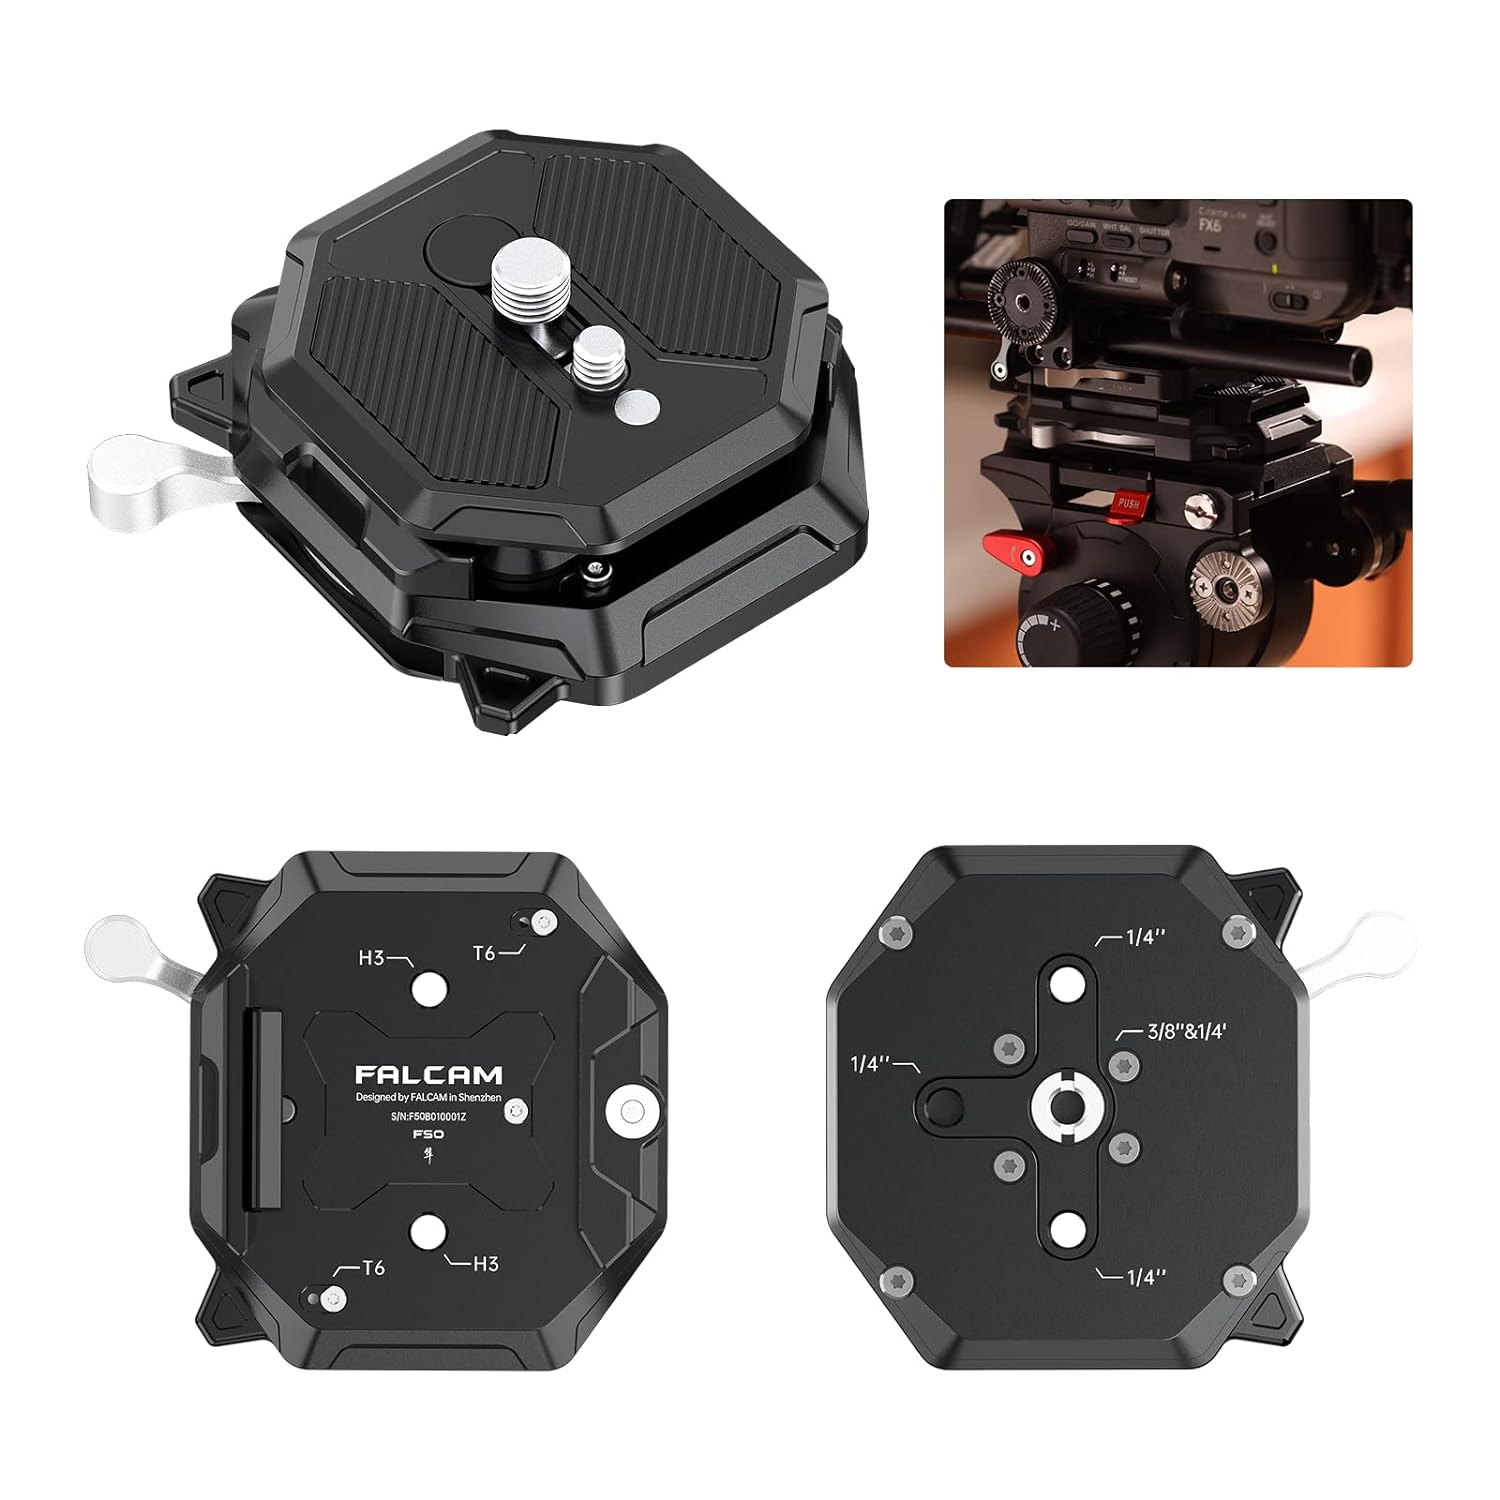 FALCAM F50 Square Quick Release Kit for Big Cinema Camera, Camera Mounting Adapter QR System, 50mm Aluminum Camera Accessory for Filmmaker & Photographer, Compatible with Manfrotto 501 Size QR Plate